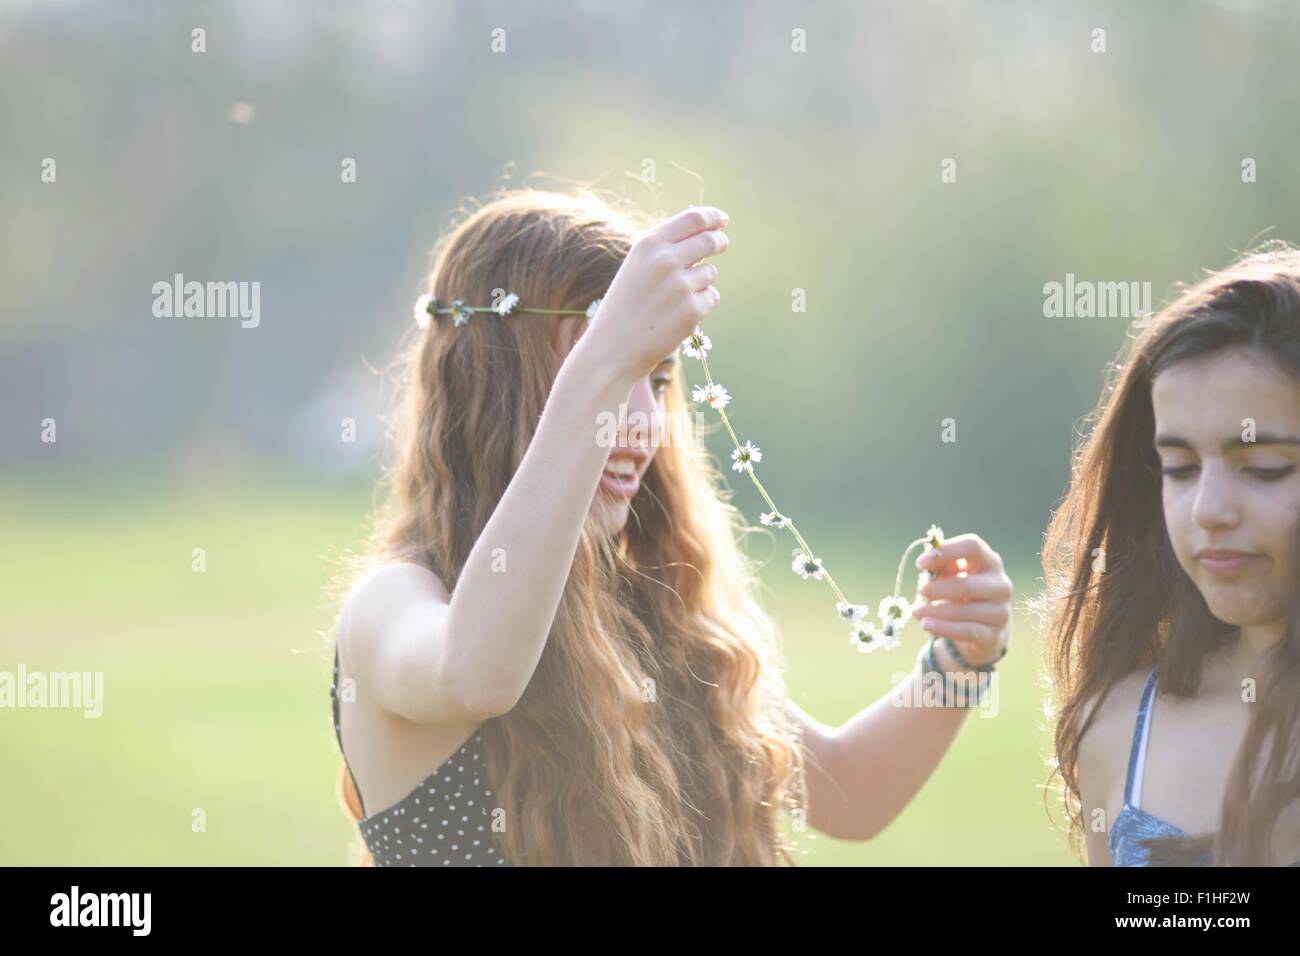 Two teenage girls putting on daisy chain headdresses in park Stock Photo